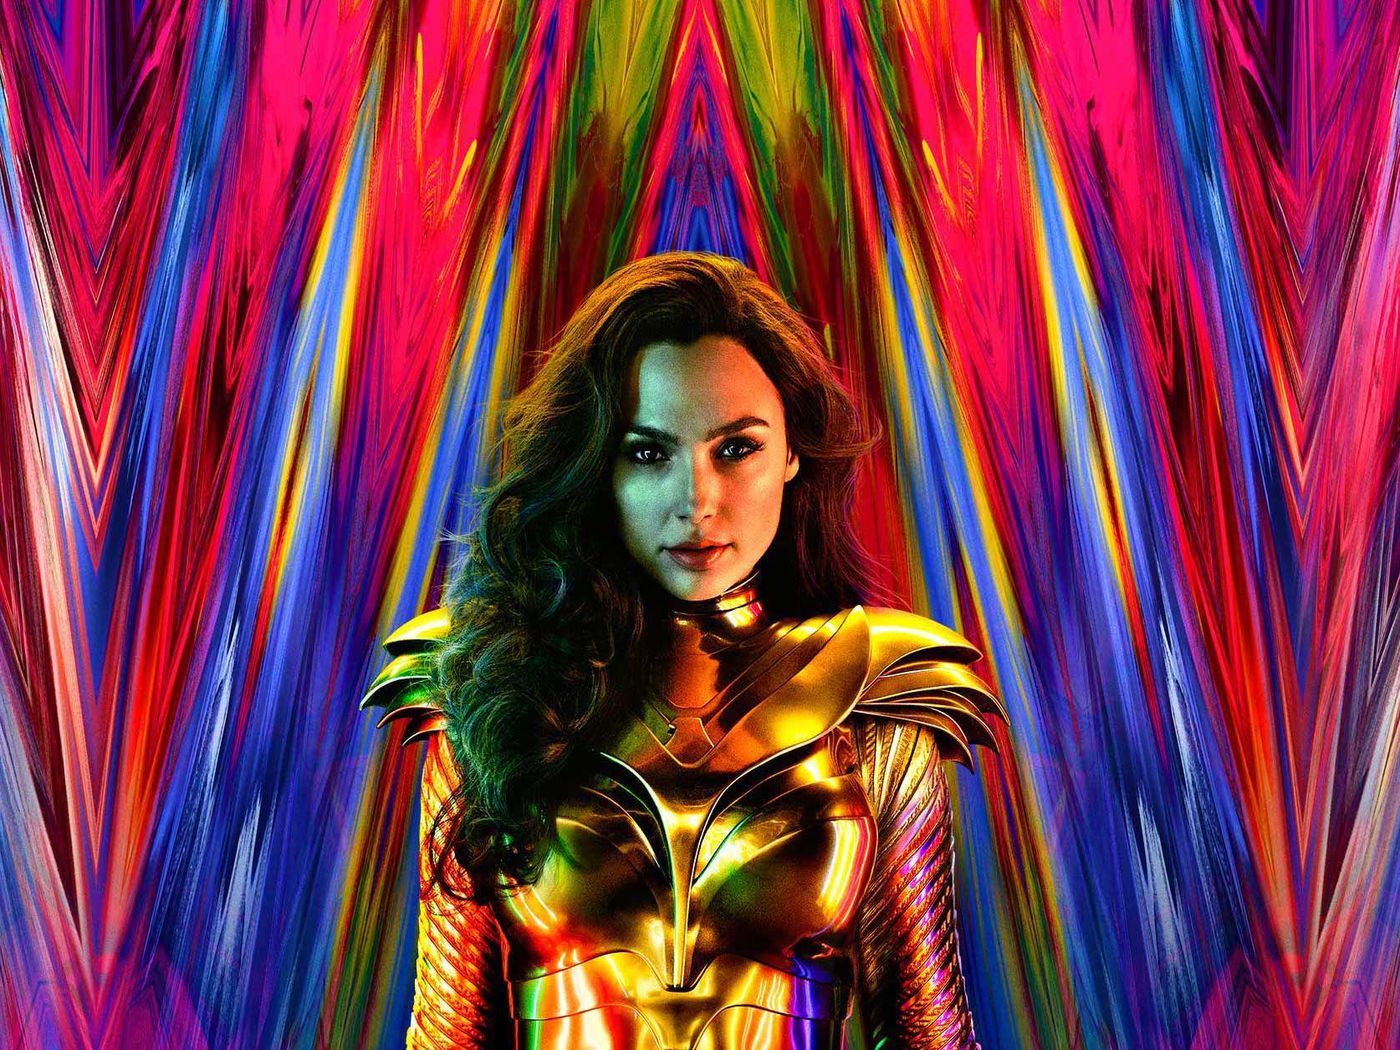 Wonder Woman director shares new poster with Gal Gadot in new costume